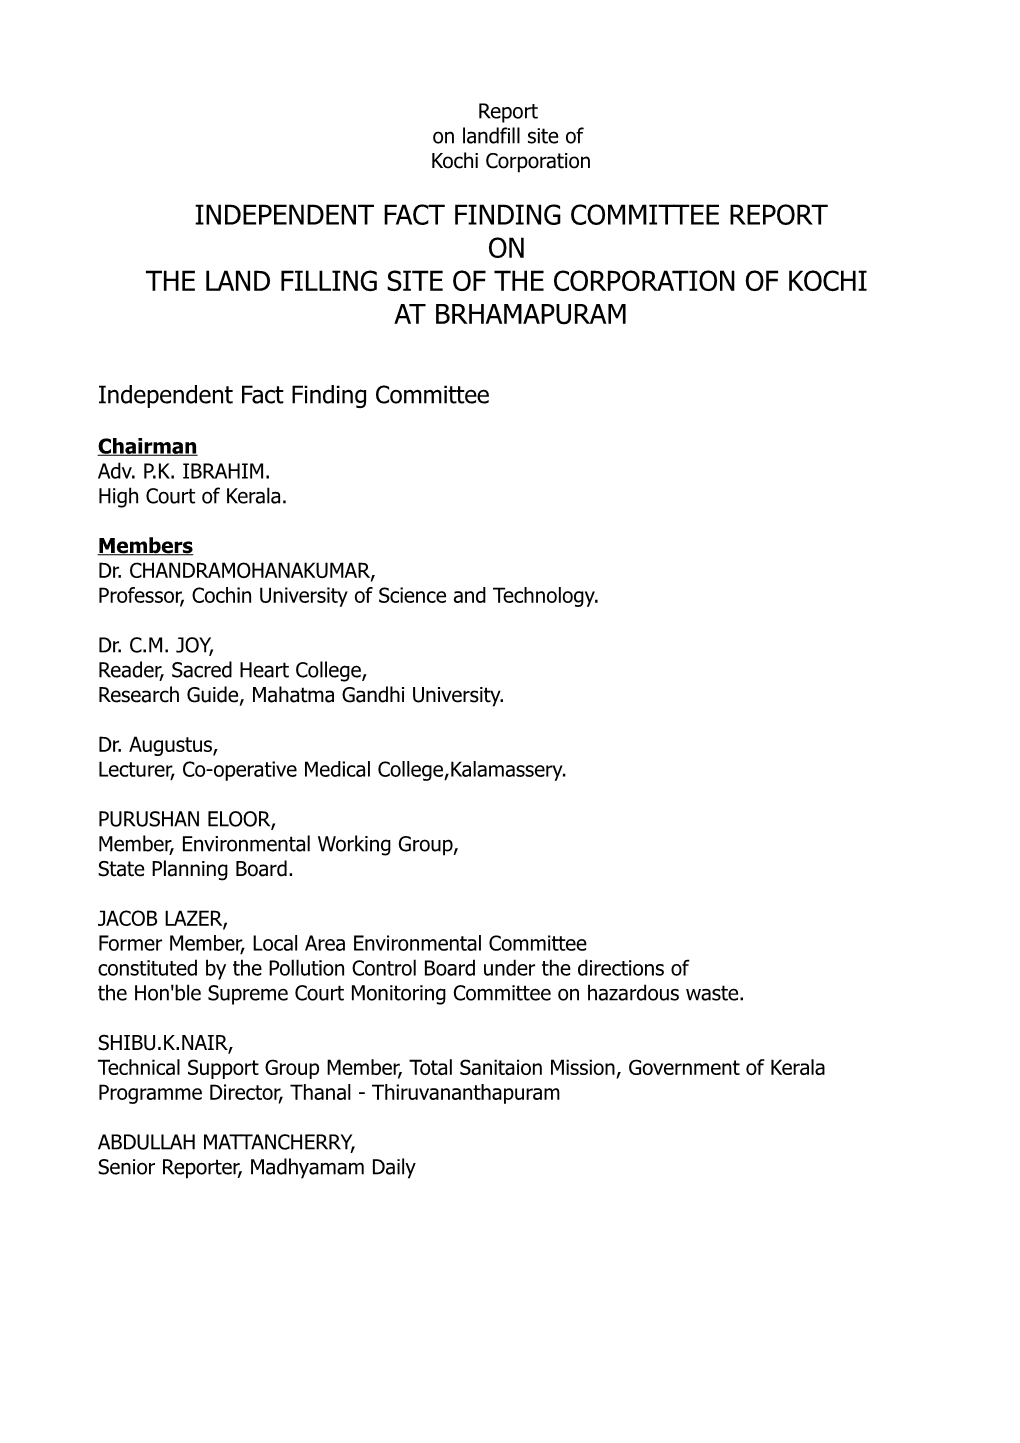 Independent Fact Finding Committee Report on the Land Filling Site of the Corporation of Kochi at Brhamapuram